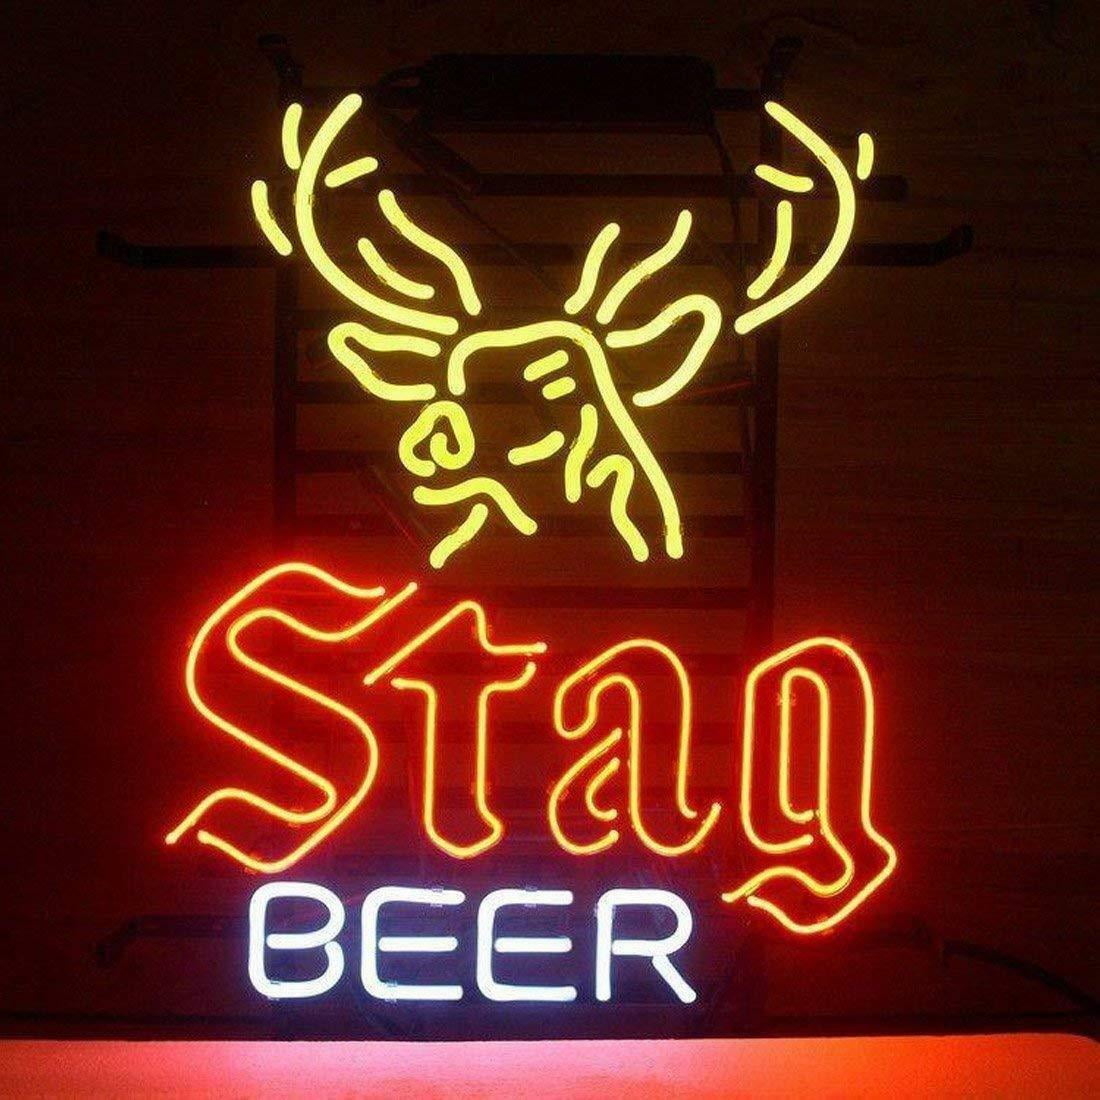 Smoked BBQ Open 17"x14" Neon Sign Lamp Light Beer With Dimmer 